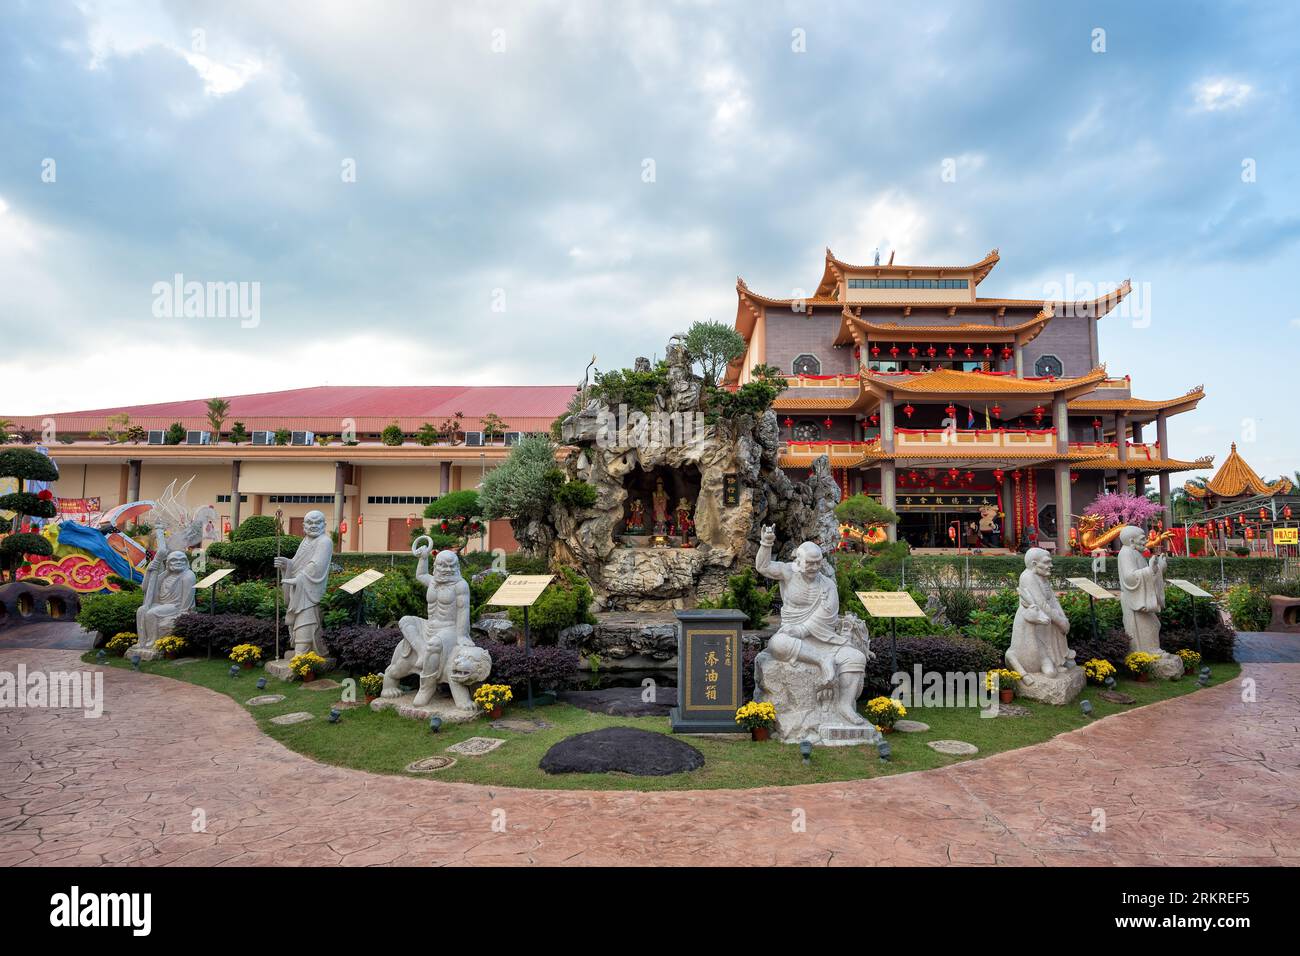 Johor, Malaysia, - Feb 8, 2019: A grand scenic traditional colourful chinese dragon temple in Yong Peng, Johor Malaysia - World`s largest and longest Stock Photo